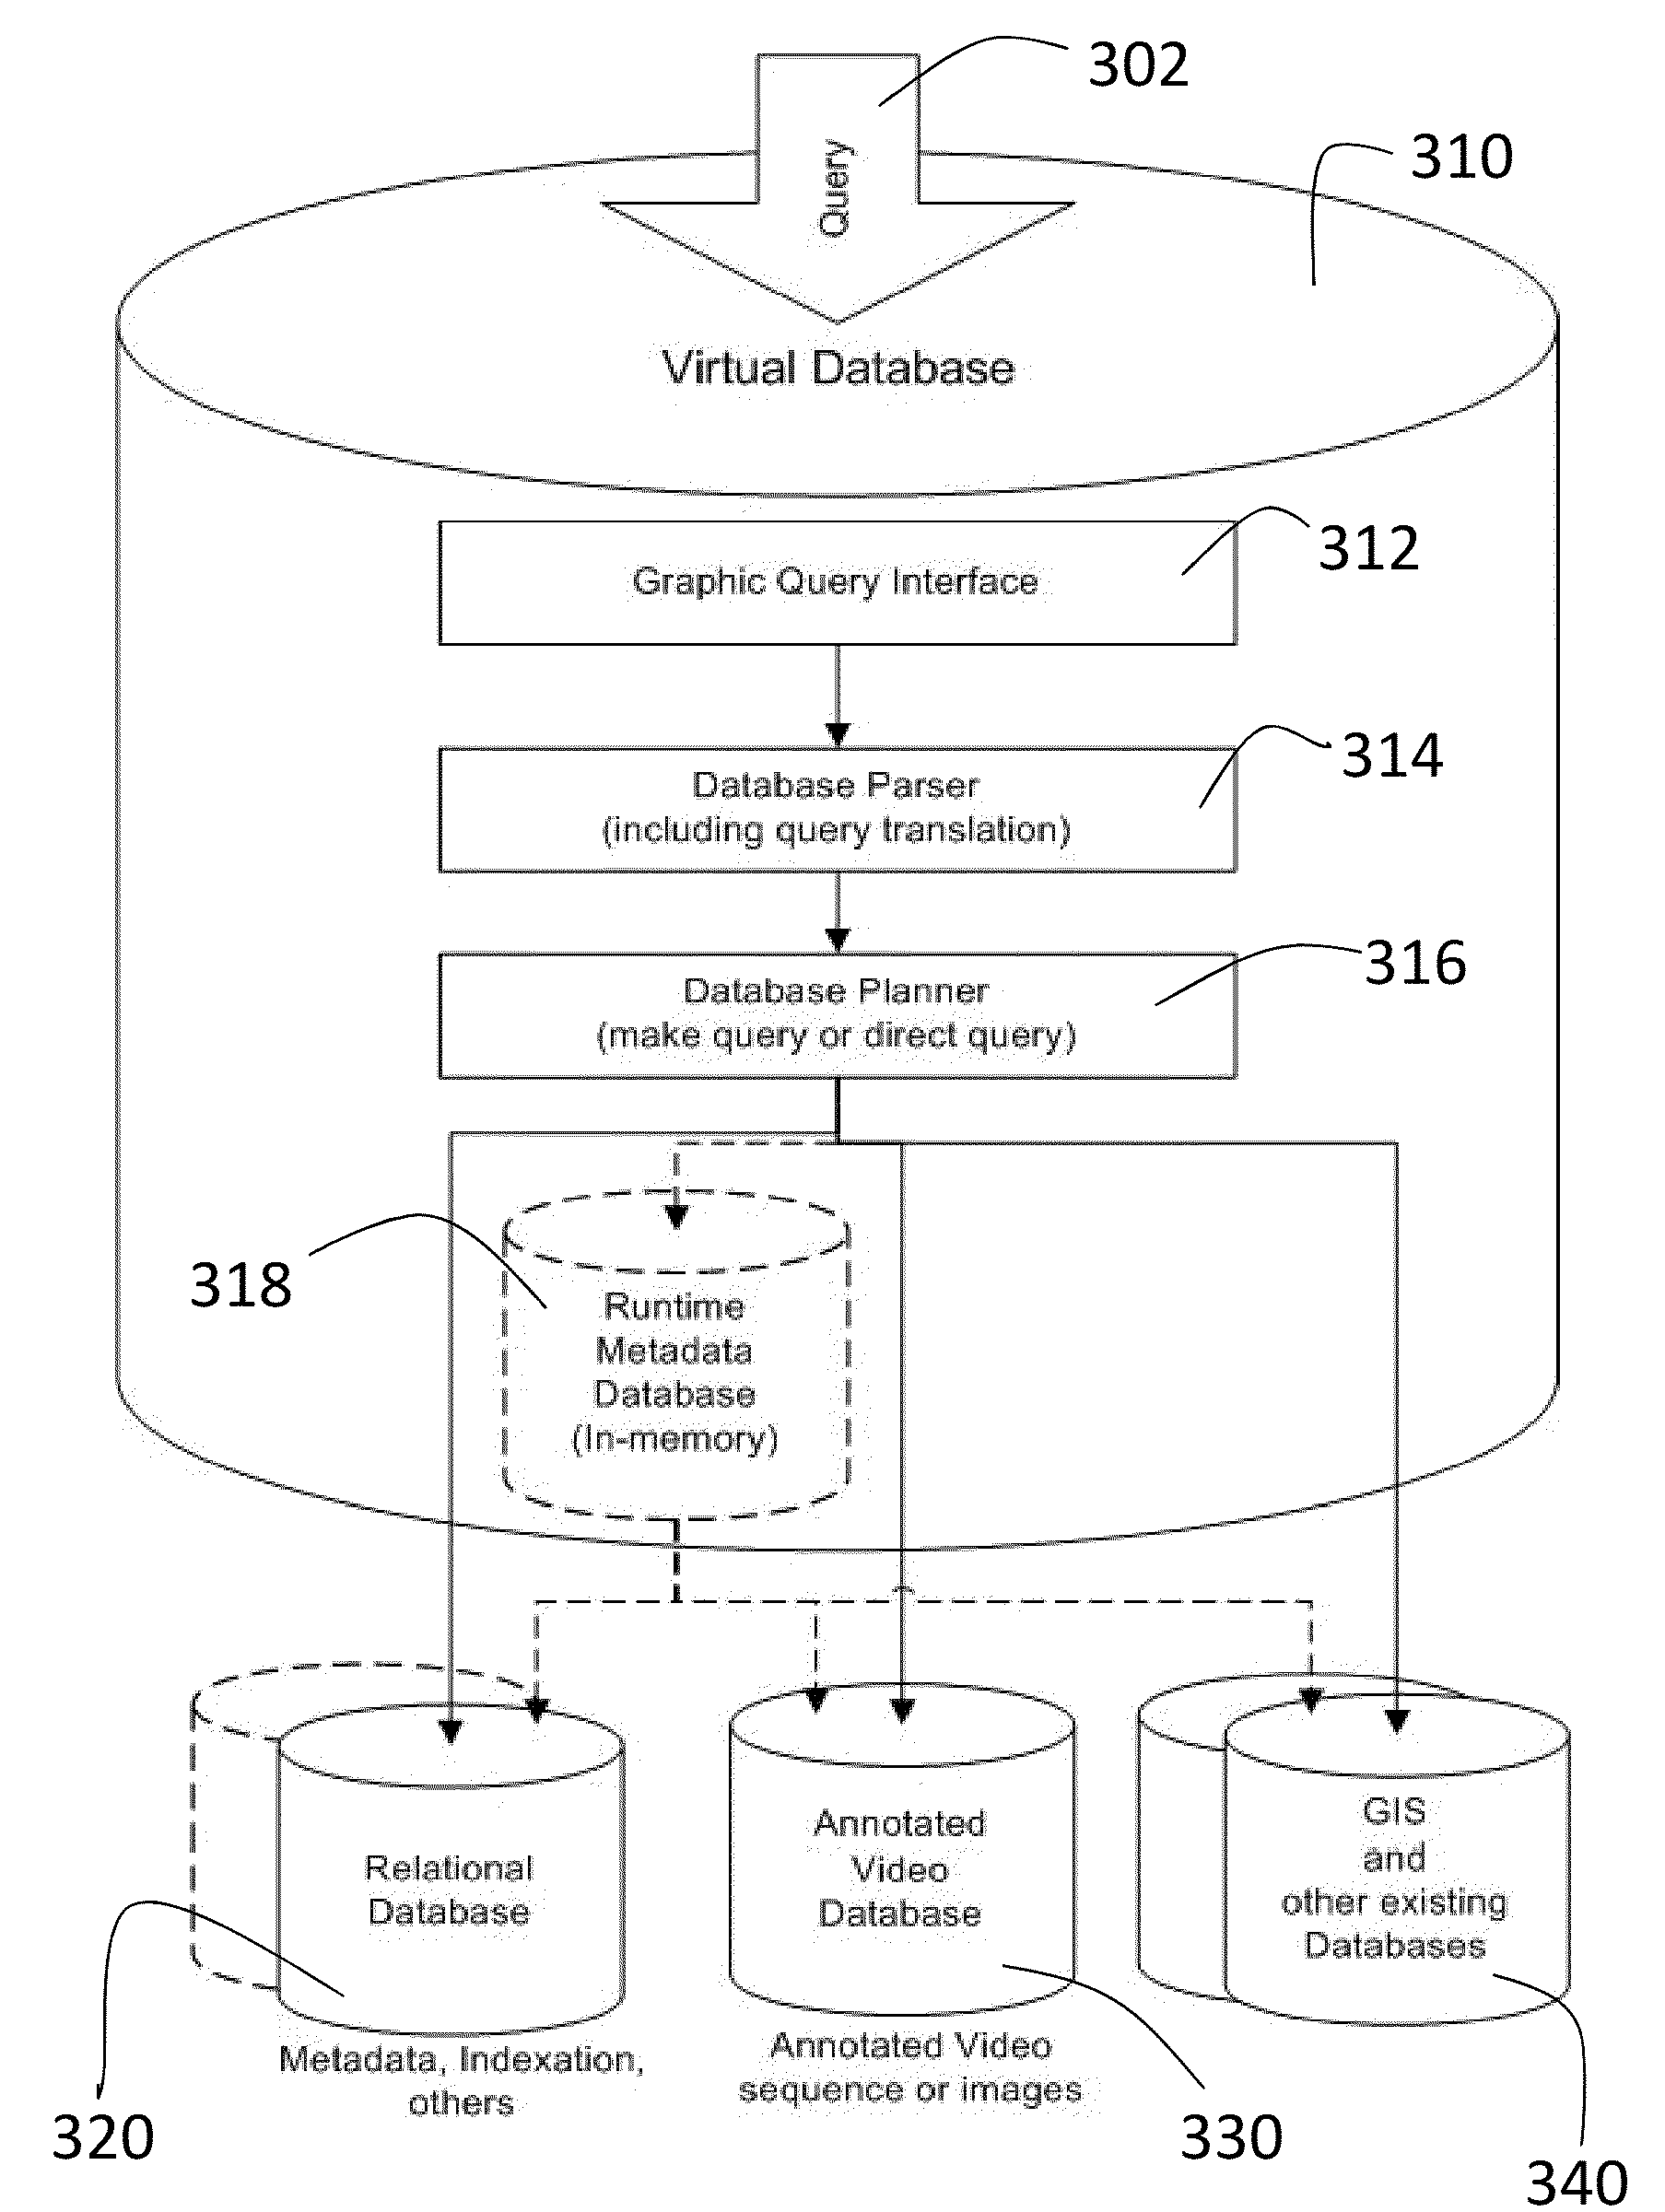 System and method for managing video, image and activity data